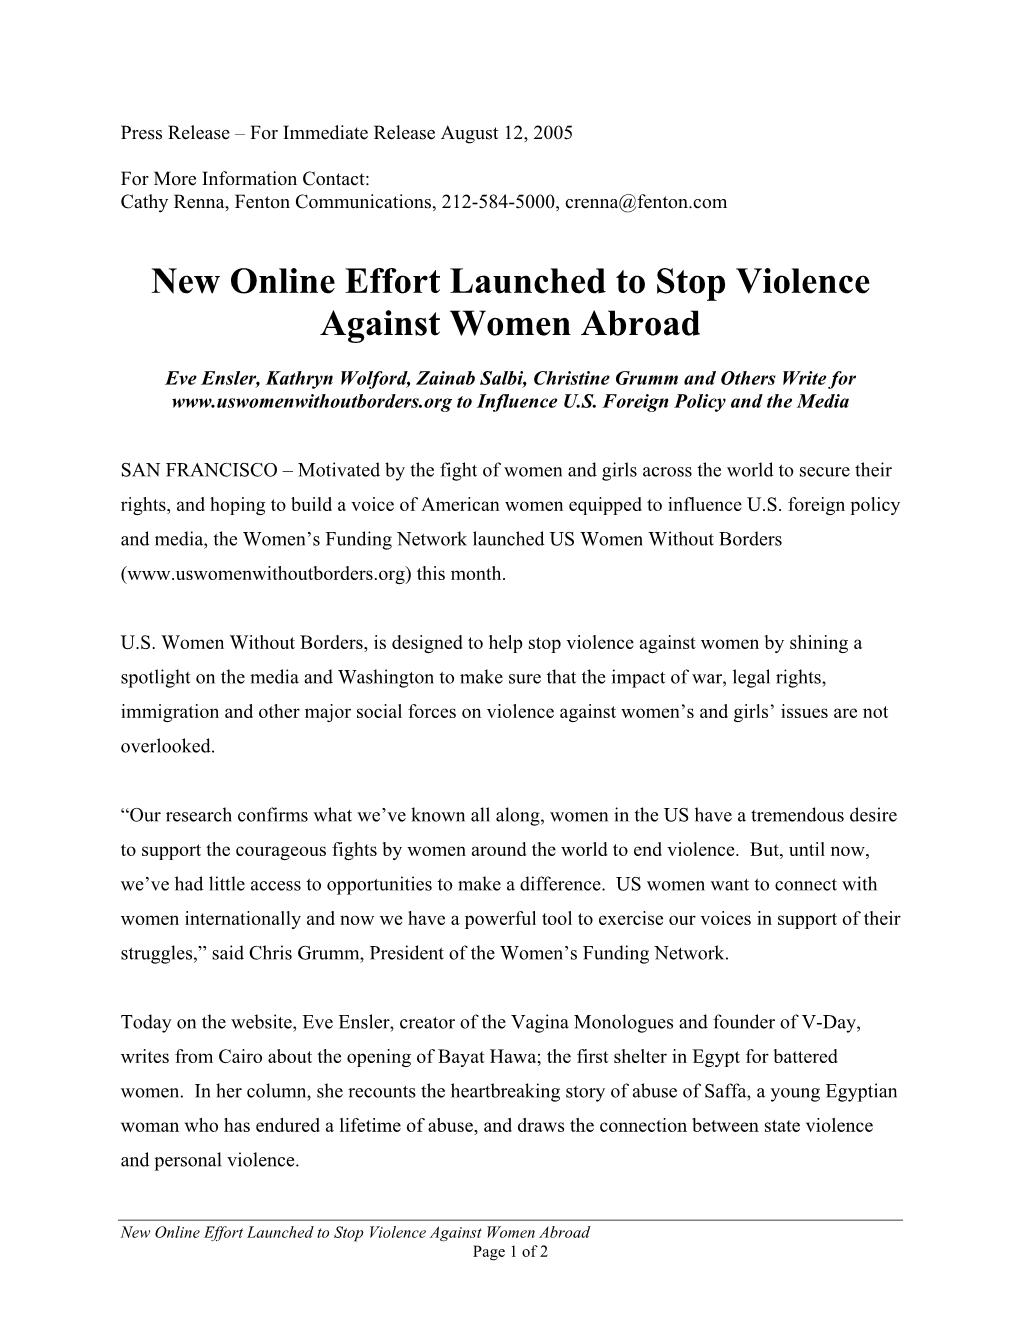 New Online Effort Launched to Stop Violence Against Women Abroad